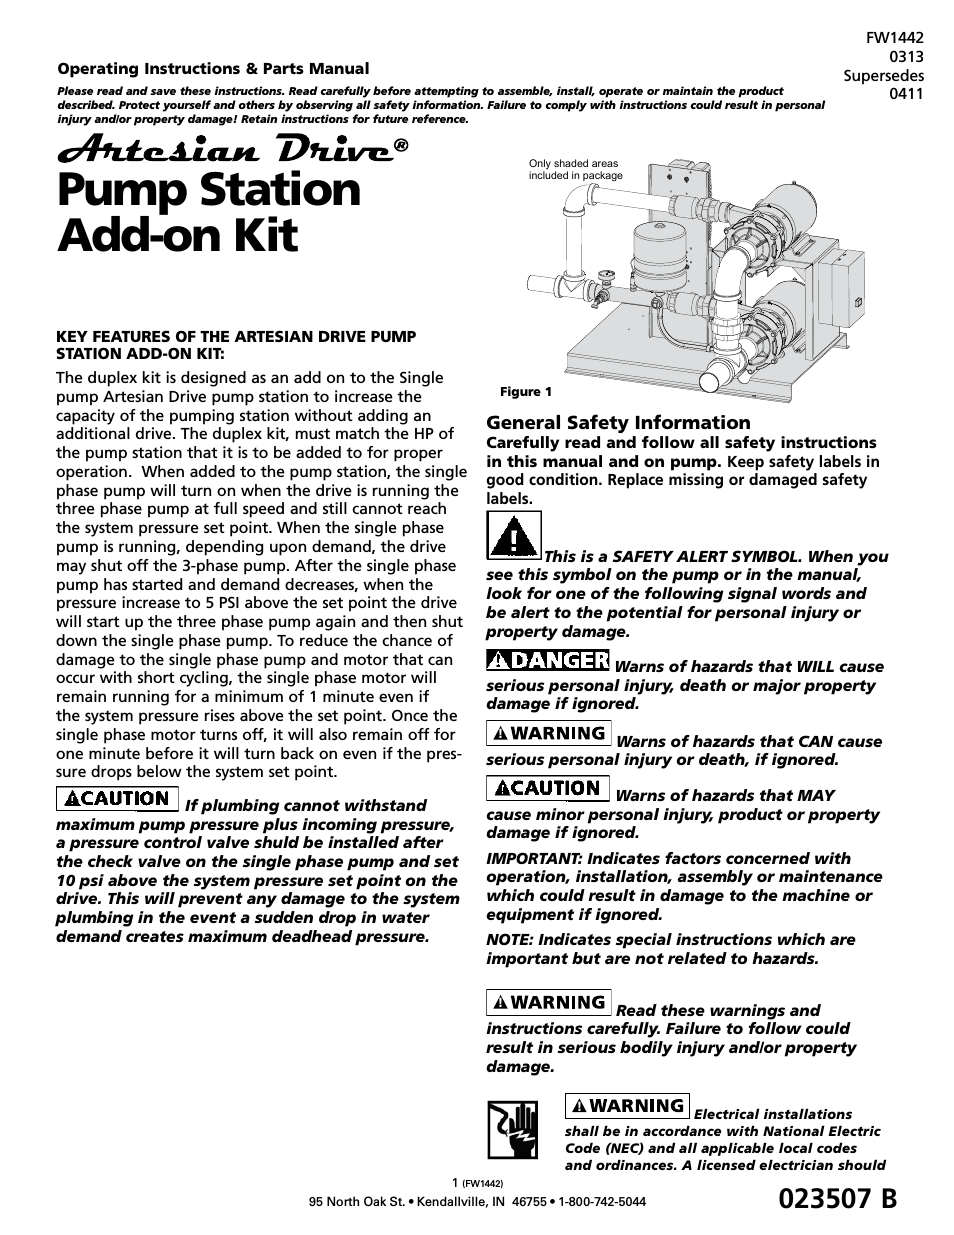 Constant Pressure Pumping Stations - Add-On Kit